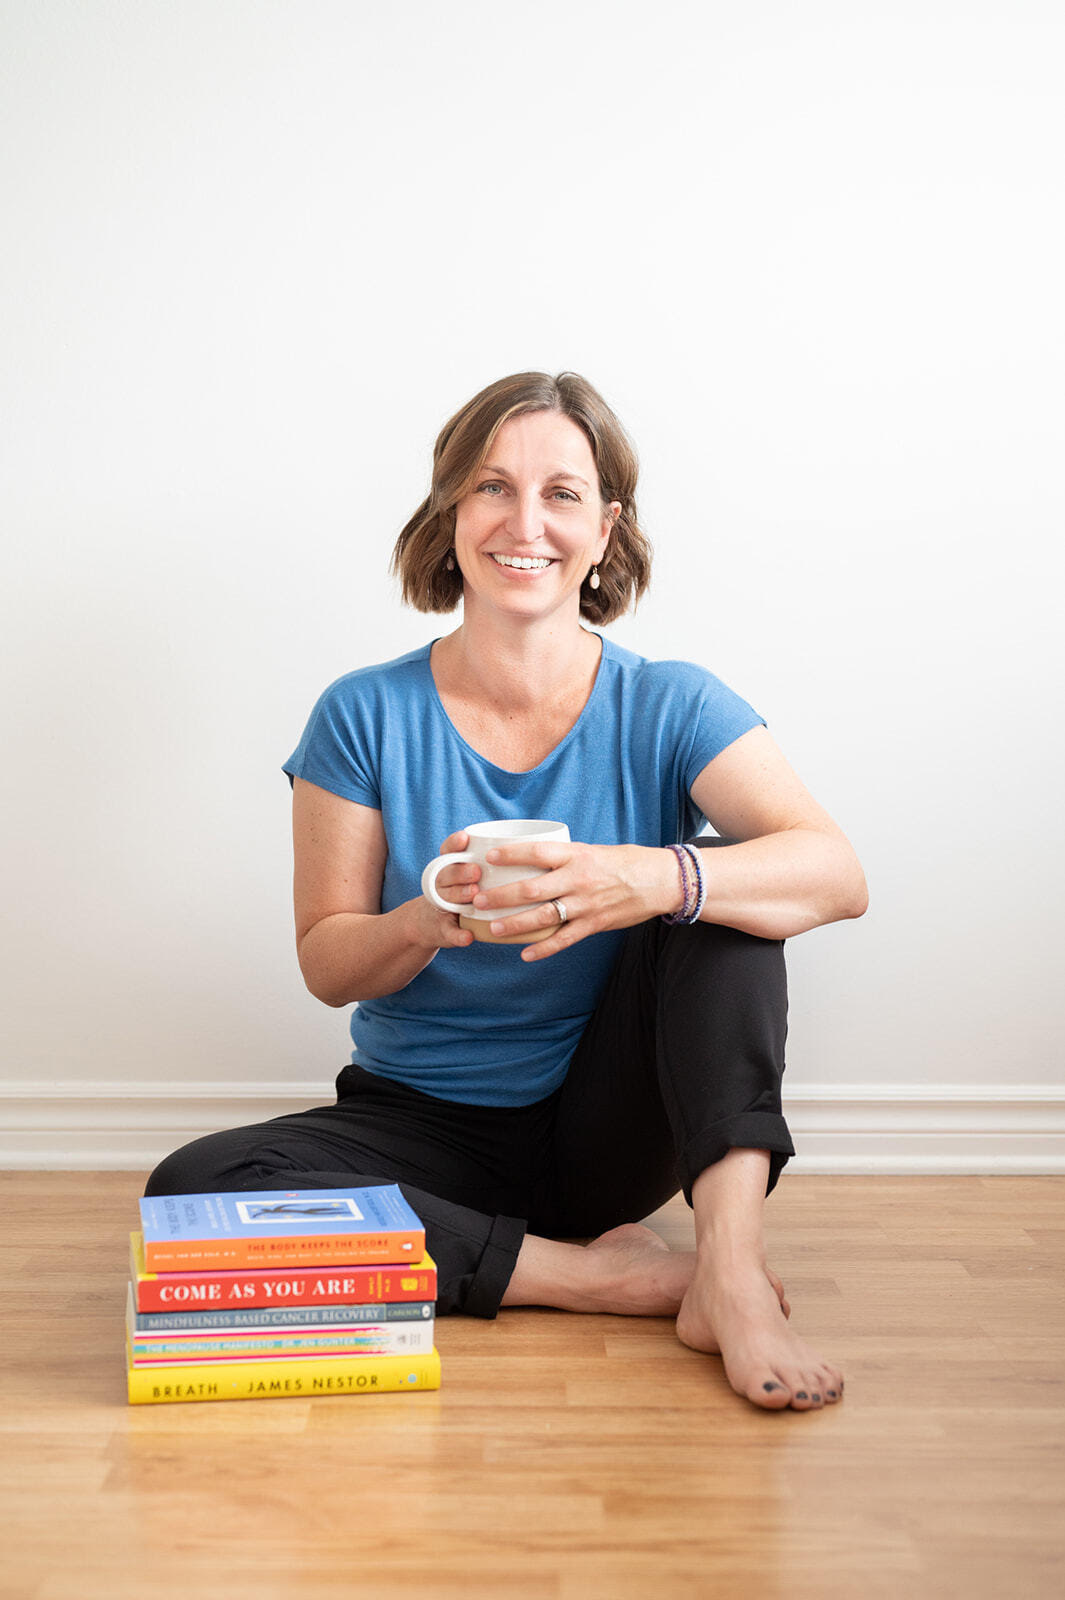 Beth Hoag, cancer rehab physiotherapist is sitting on the floor with a stack of books in front of her smiling and holding a coffee cup.